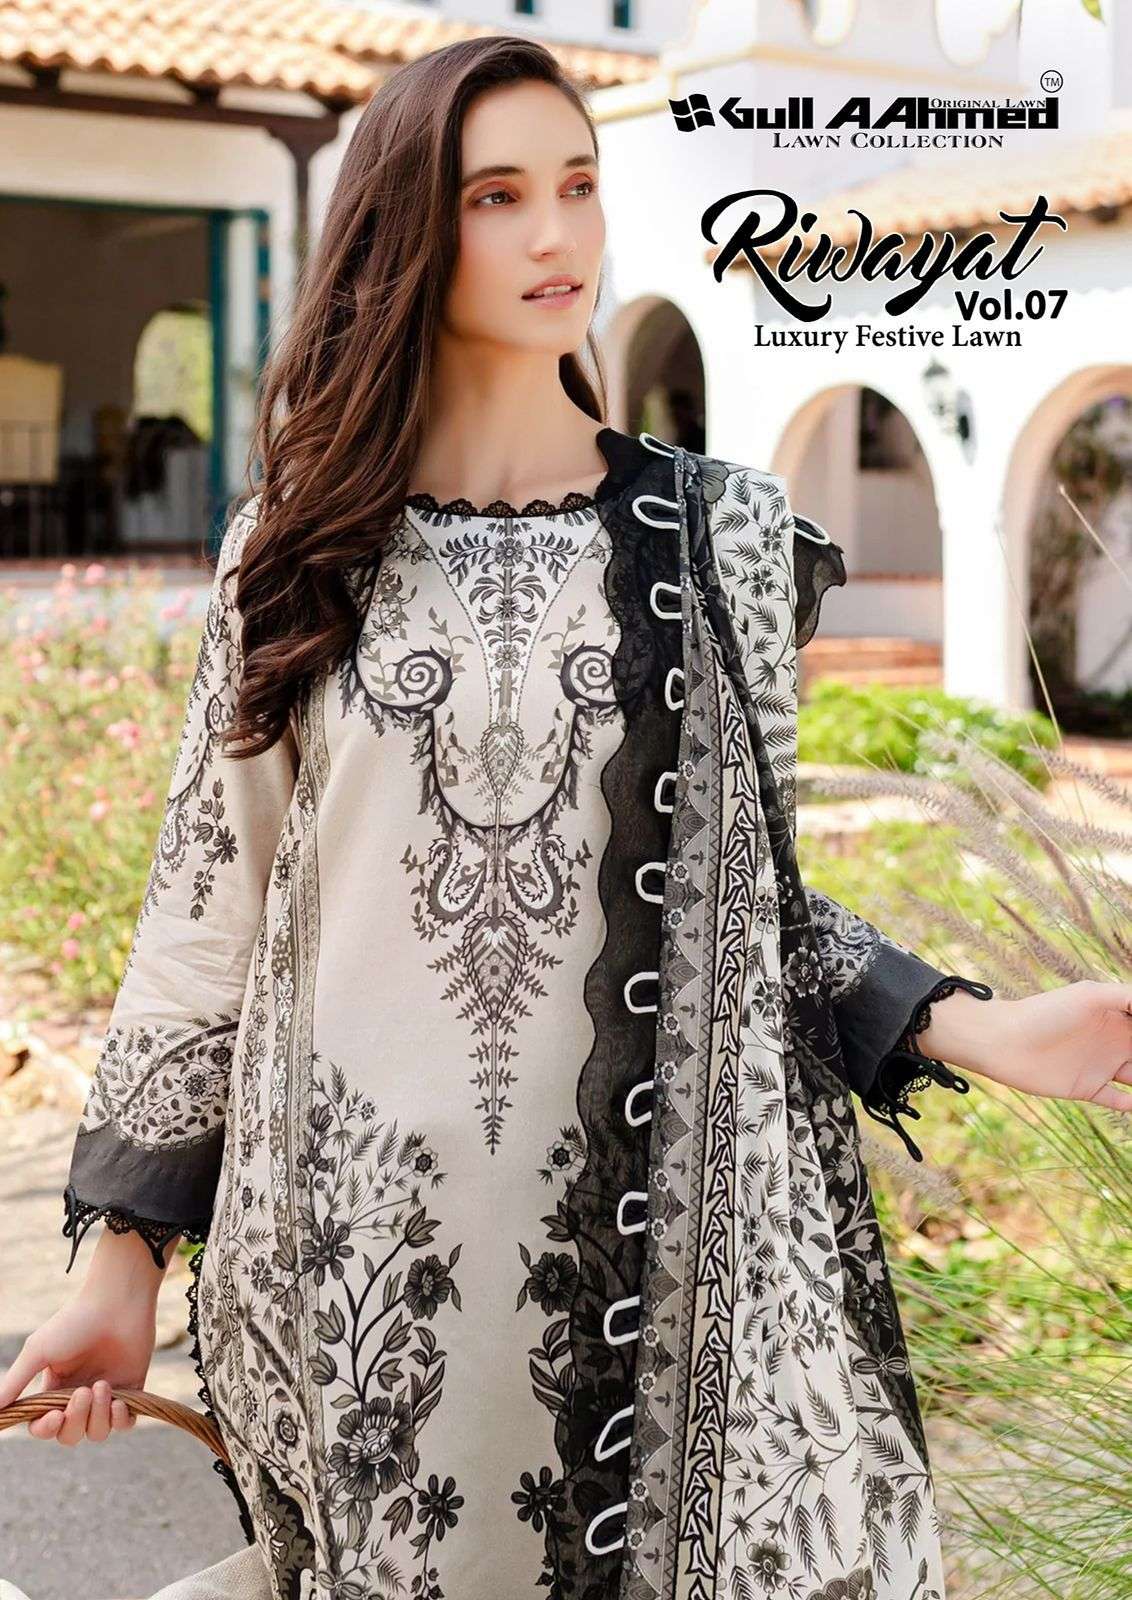 riwayat vol-7 by gull aahmed 7001-7006 series pure lawn collection with mal mal dupatta catalogue surat gujarat